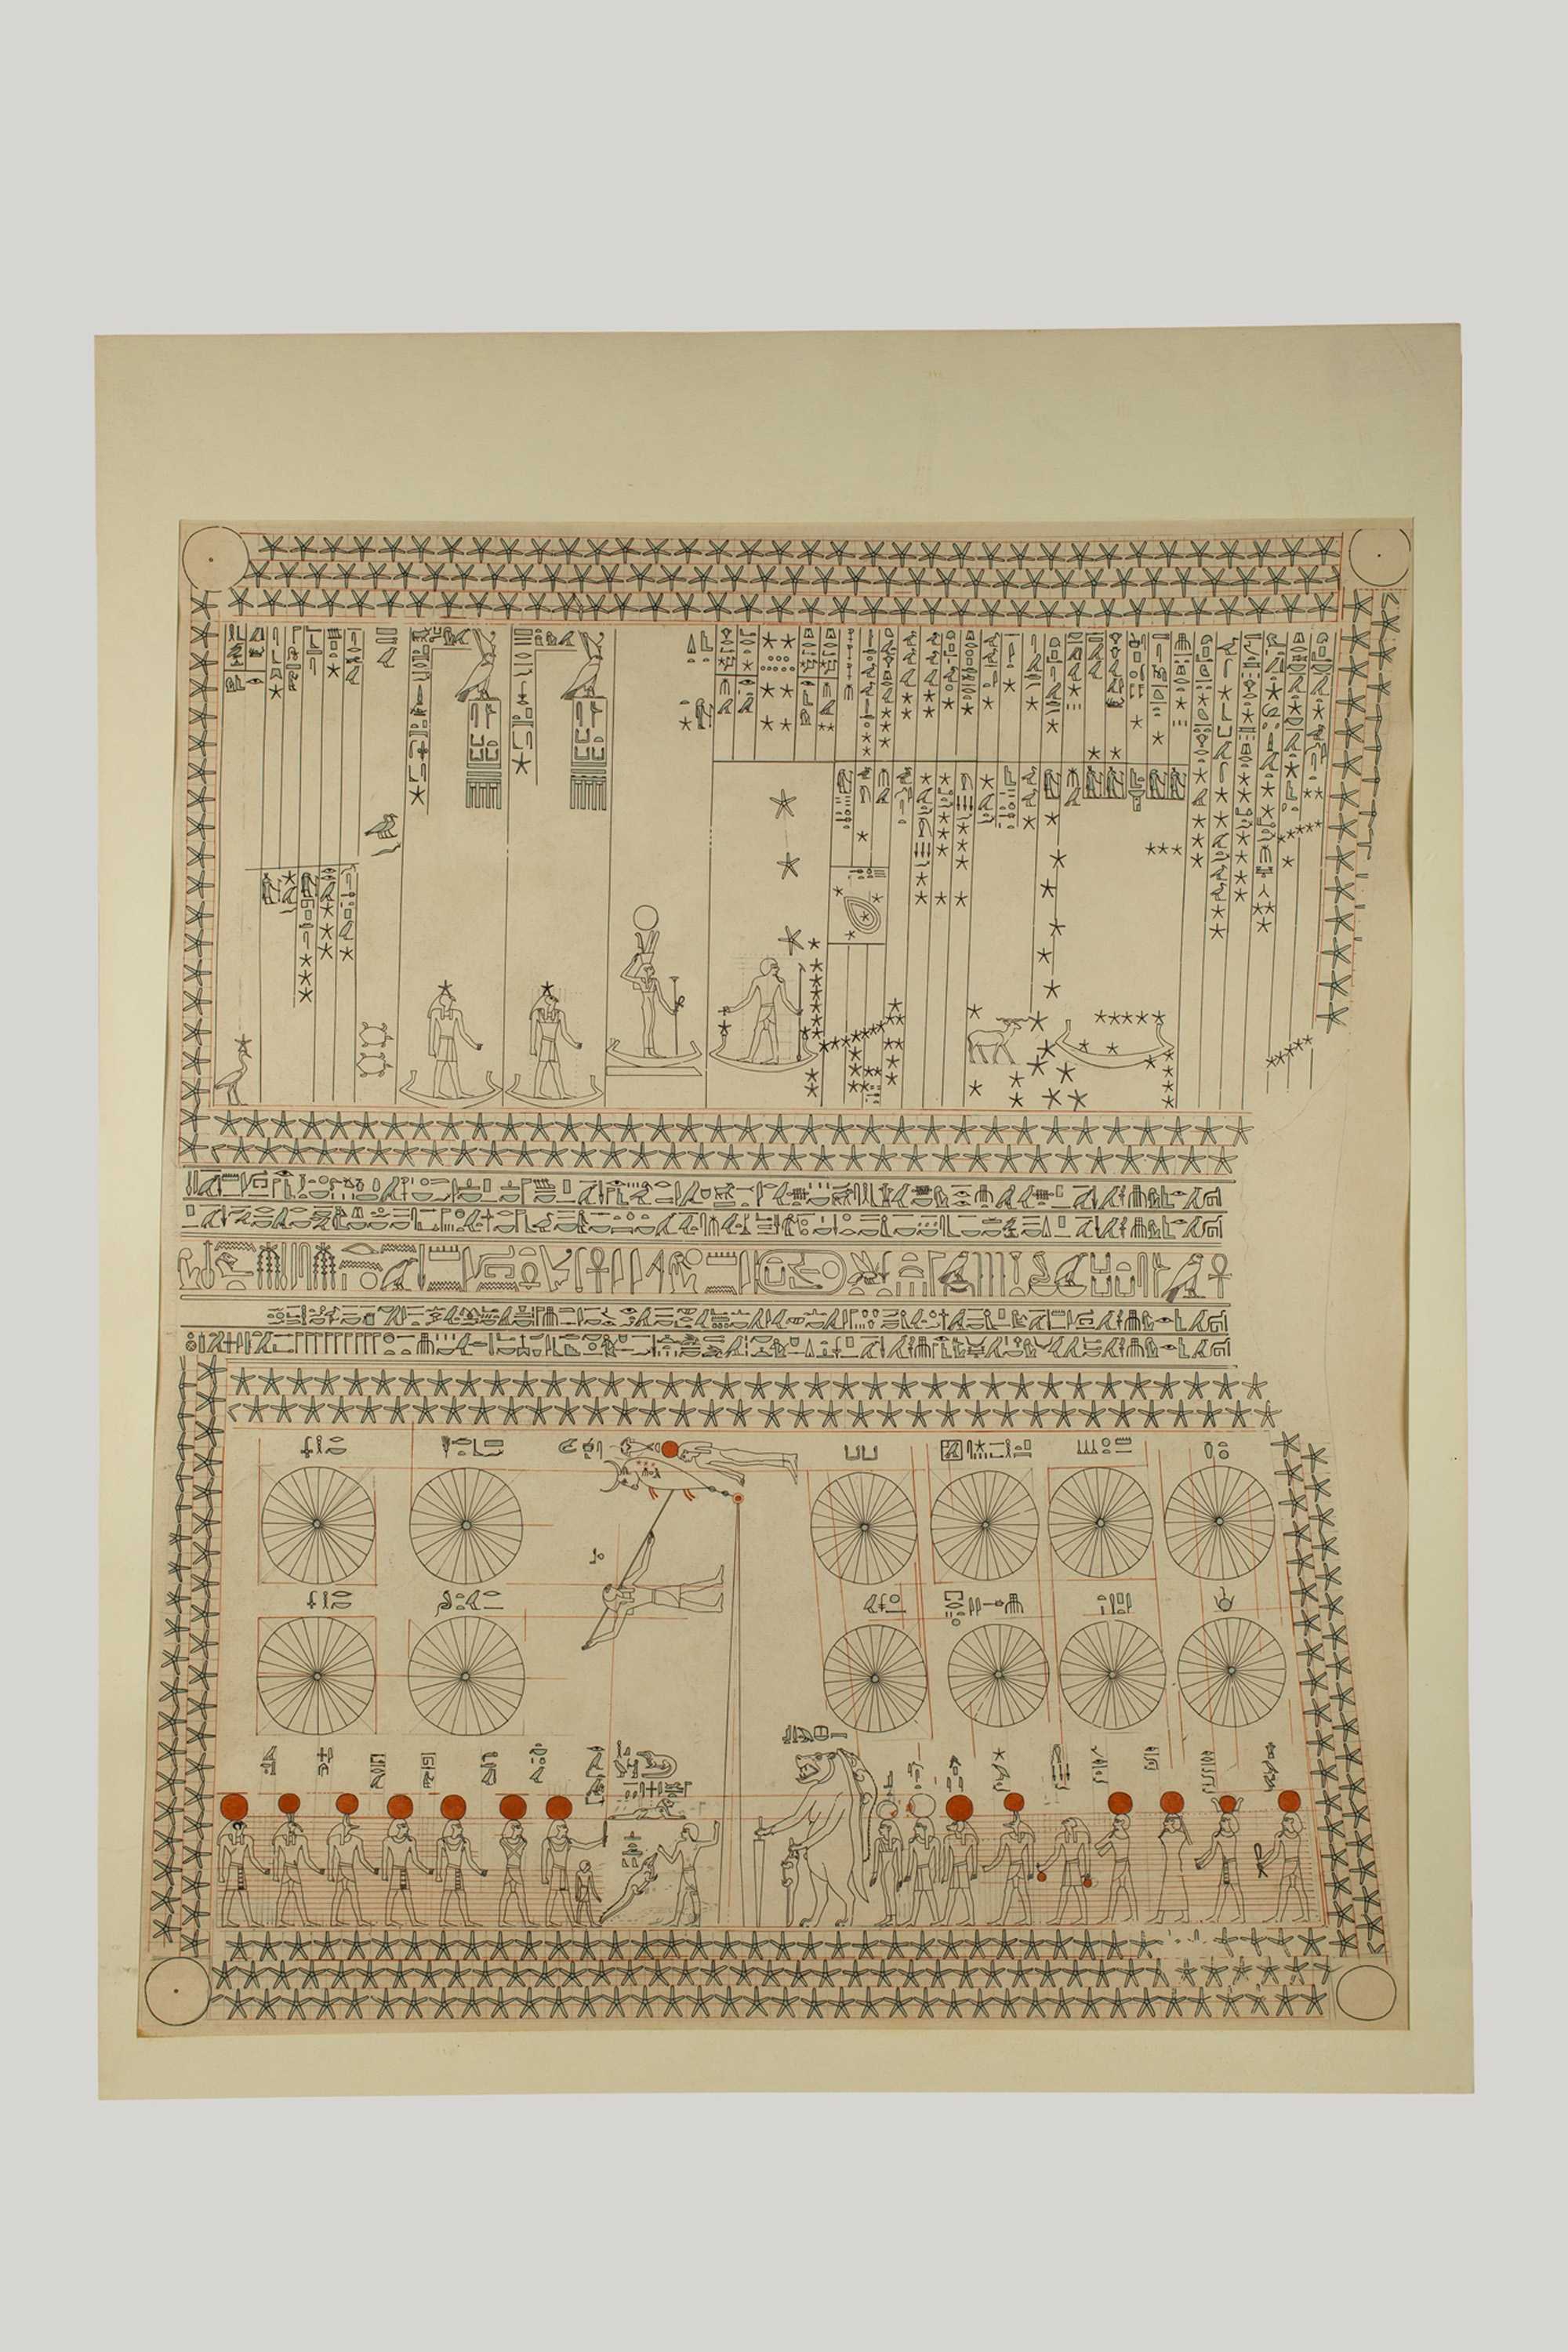 A guide with hieroglyphics and other drawings, objects, and information on a tan background.